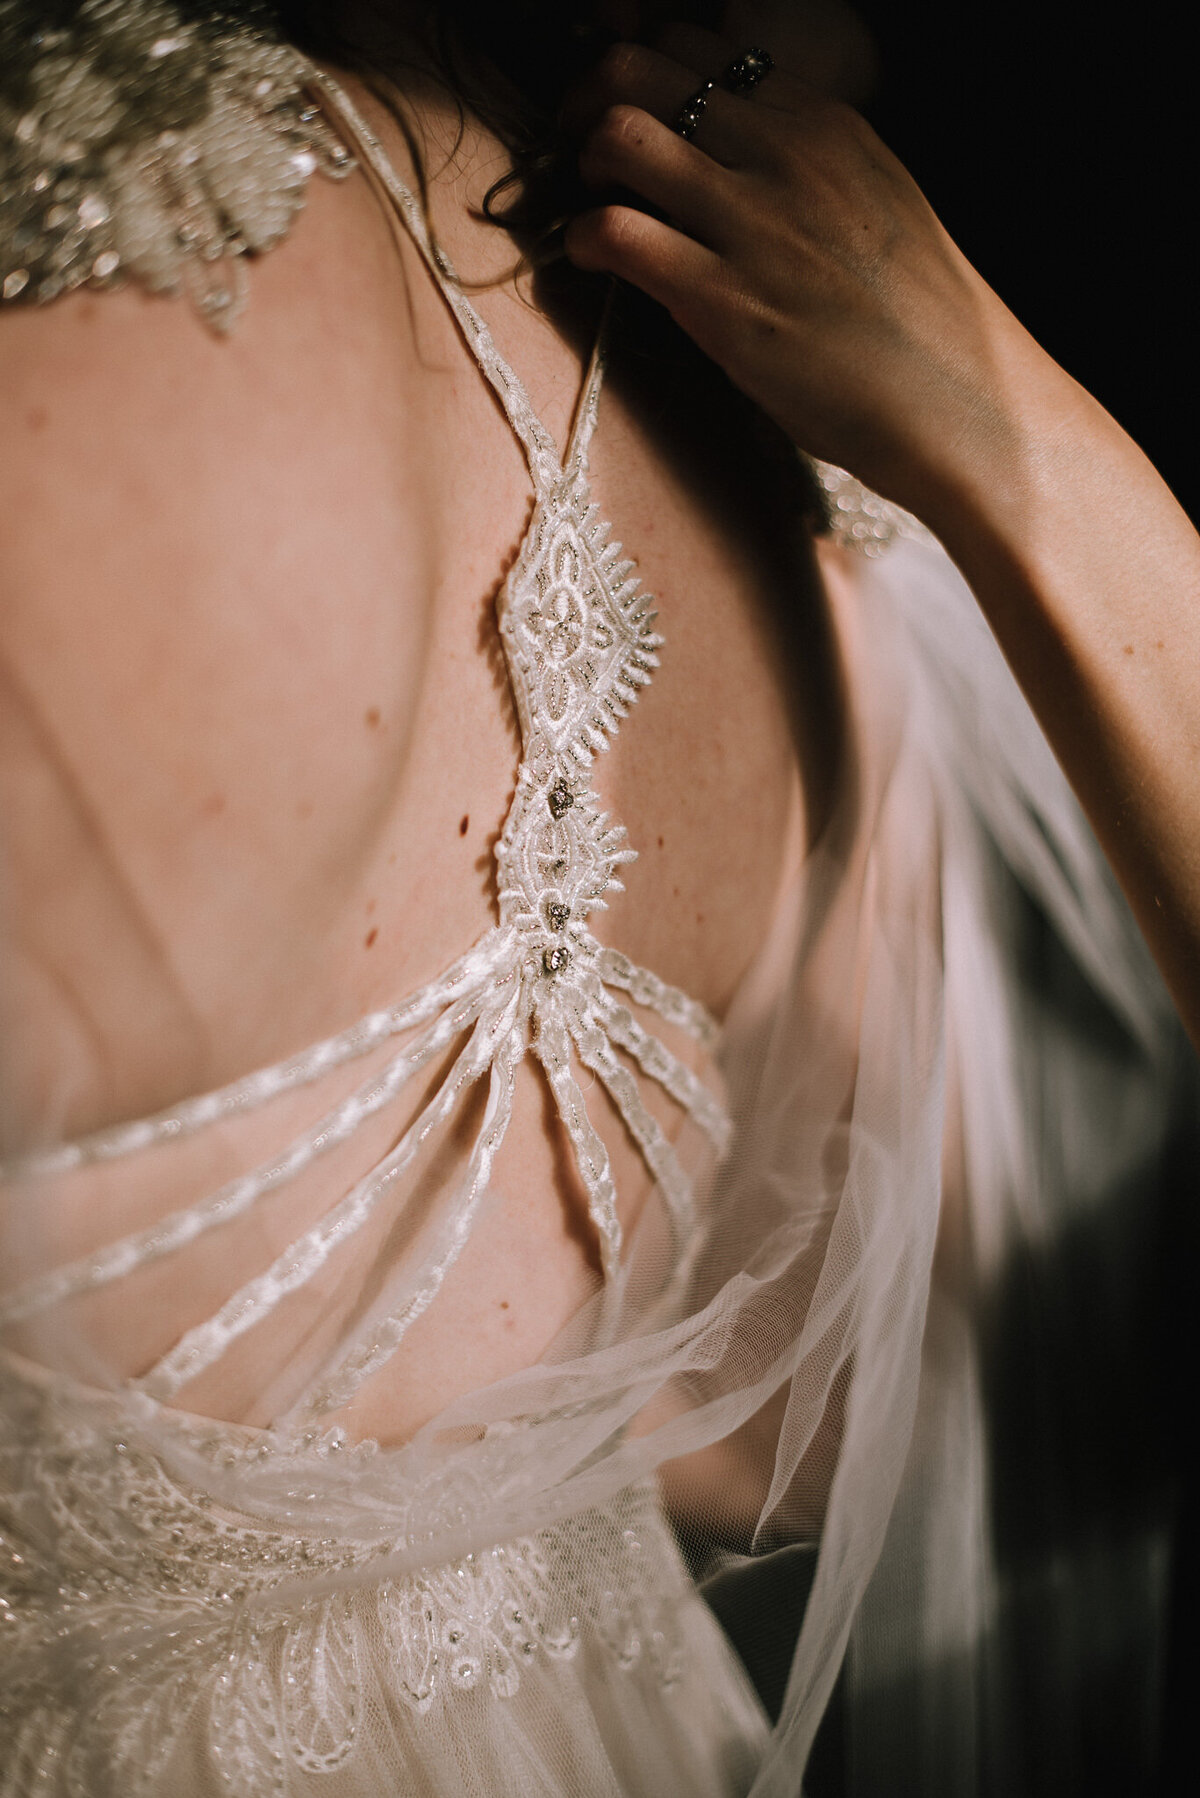 Wedding Dress Detail of Bride before Ceremony by Charlotte North Carolina Fort Mill Photographer